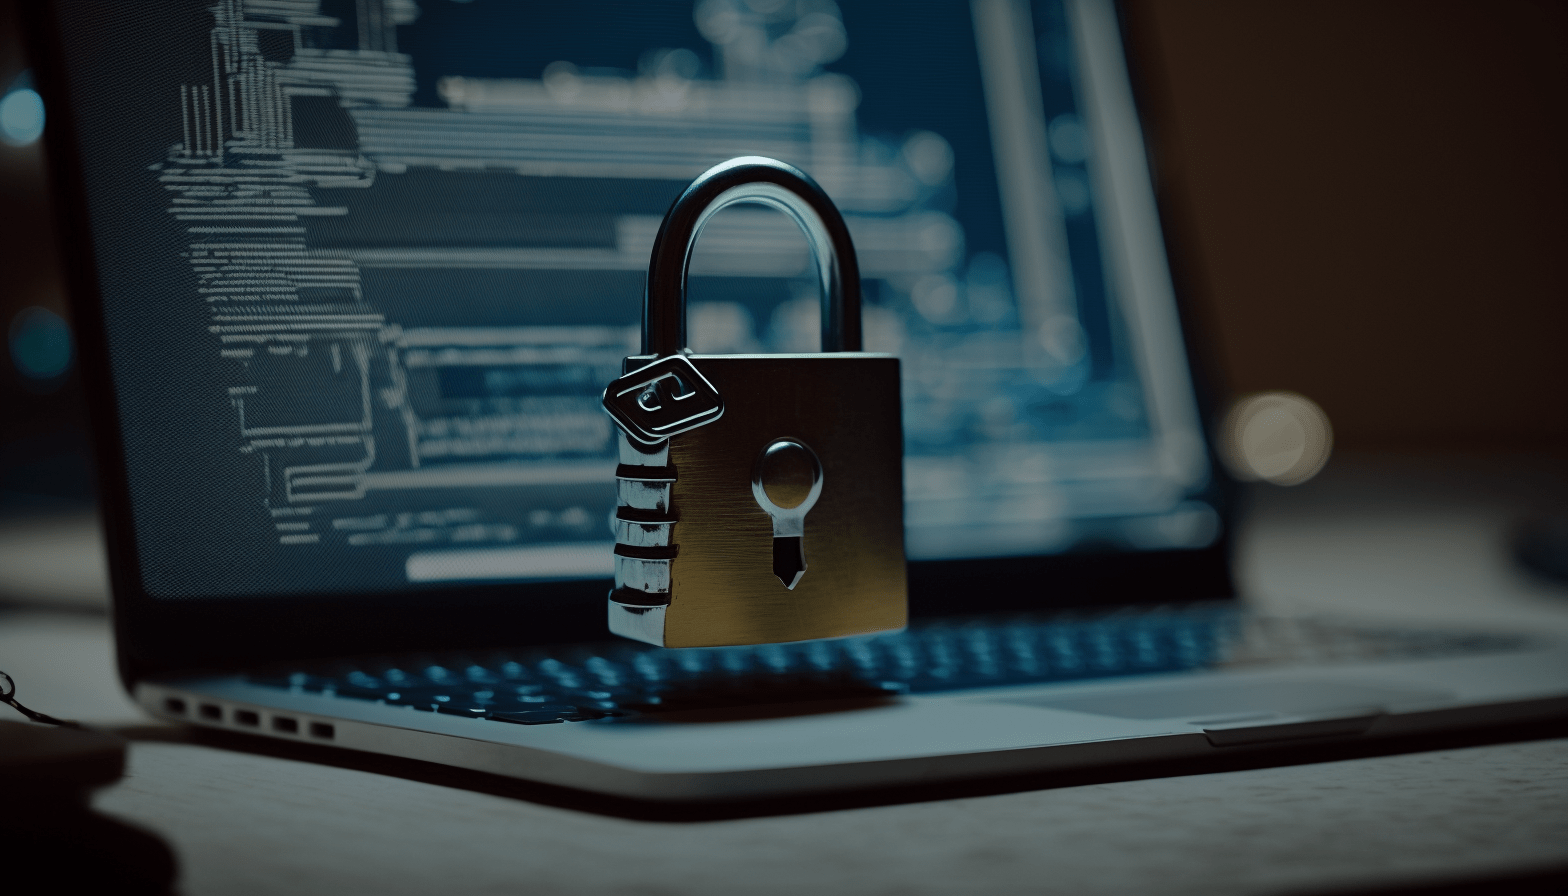 An image of a locked padlock on top of a computer or laptop screen, symbolizing the security measures that can be implemented through Windows hardening and debloating.